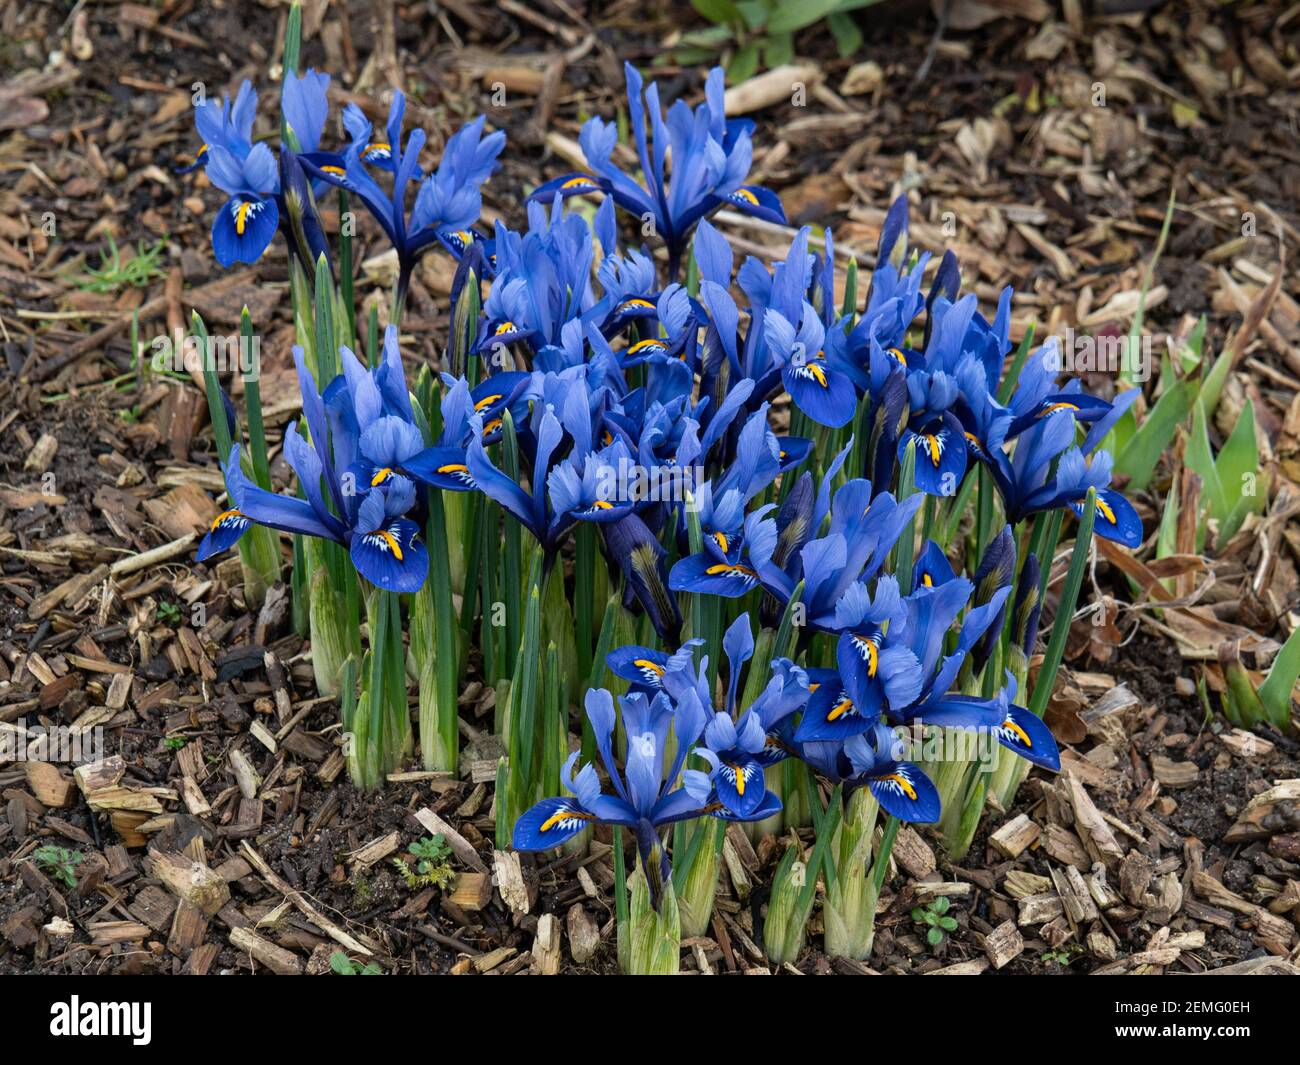 A flowering patch of the dwarf Iris reticulata Harmony with characteristic blue flowers Stock Photo